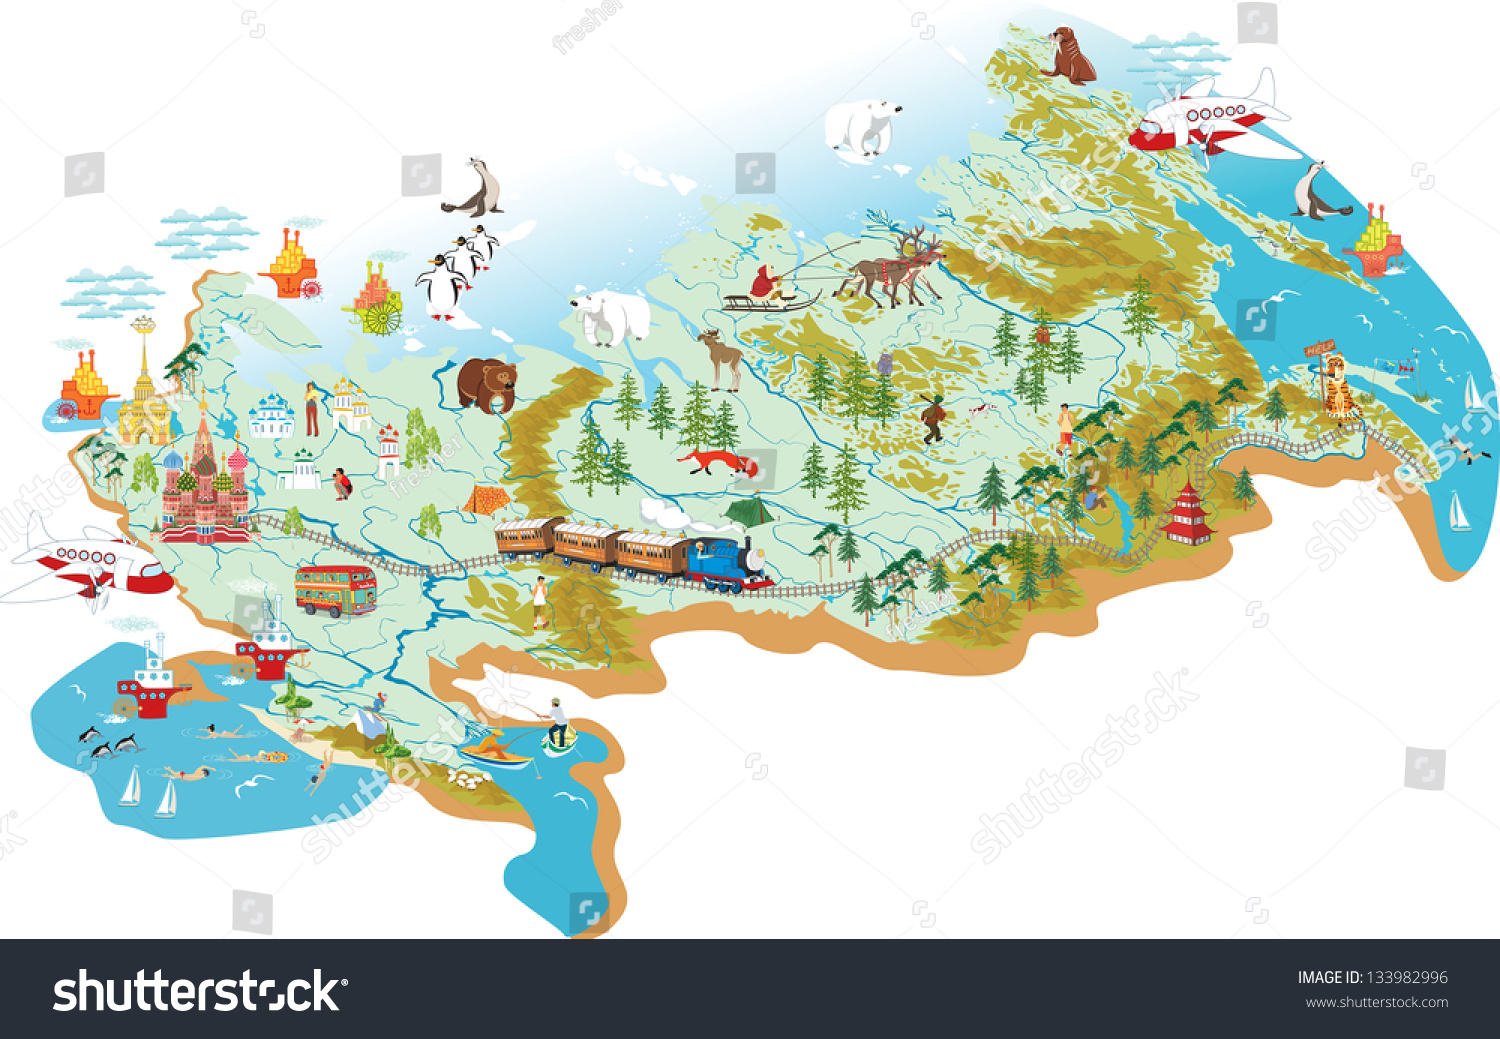 clipart russia map - photo #18